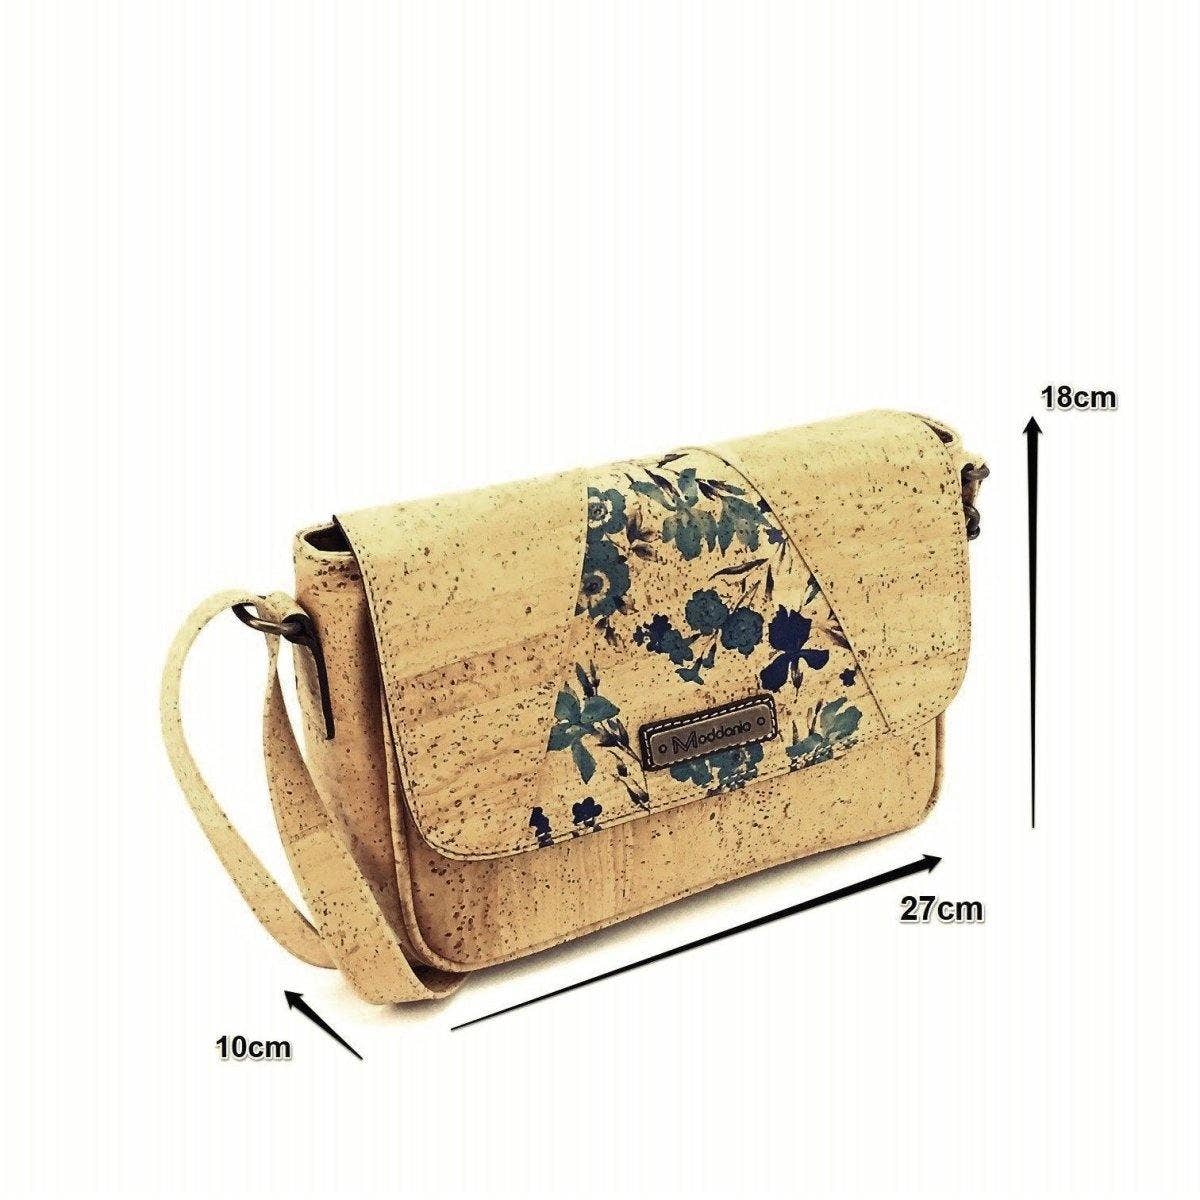 Cork Crossbody Purse for Women and Small Vegan Bag in Blue Floral